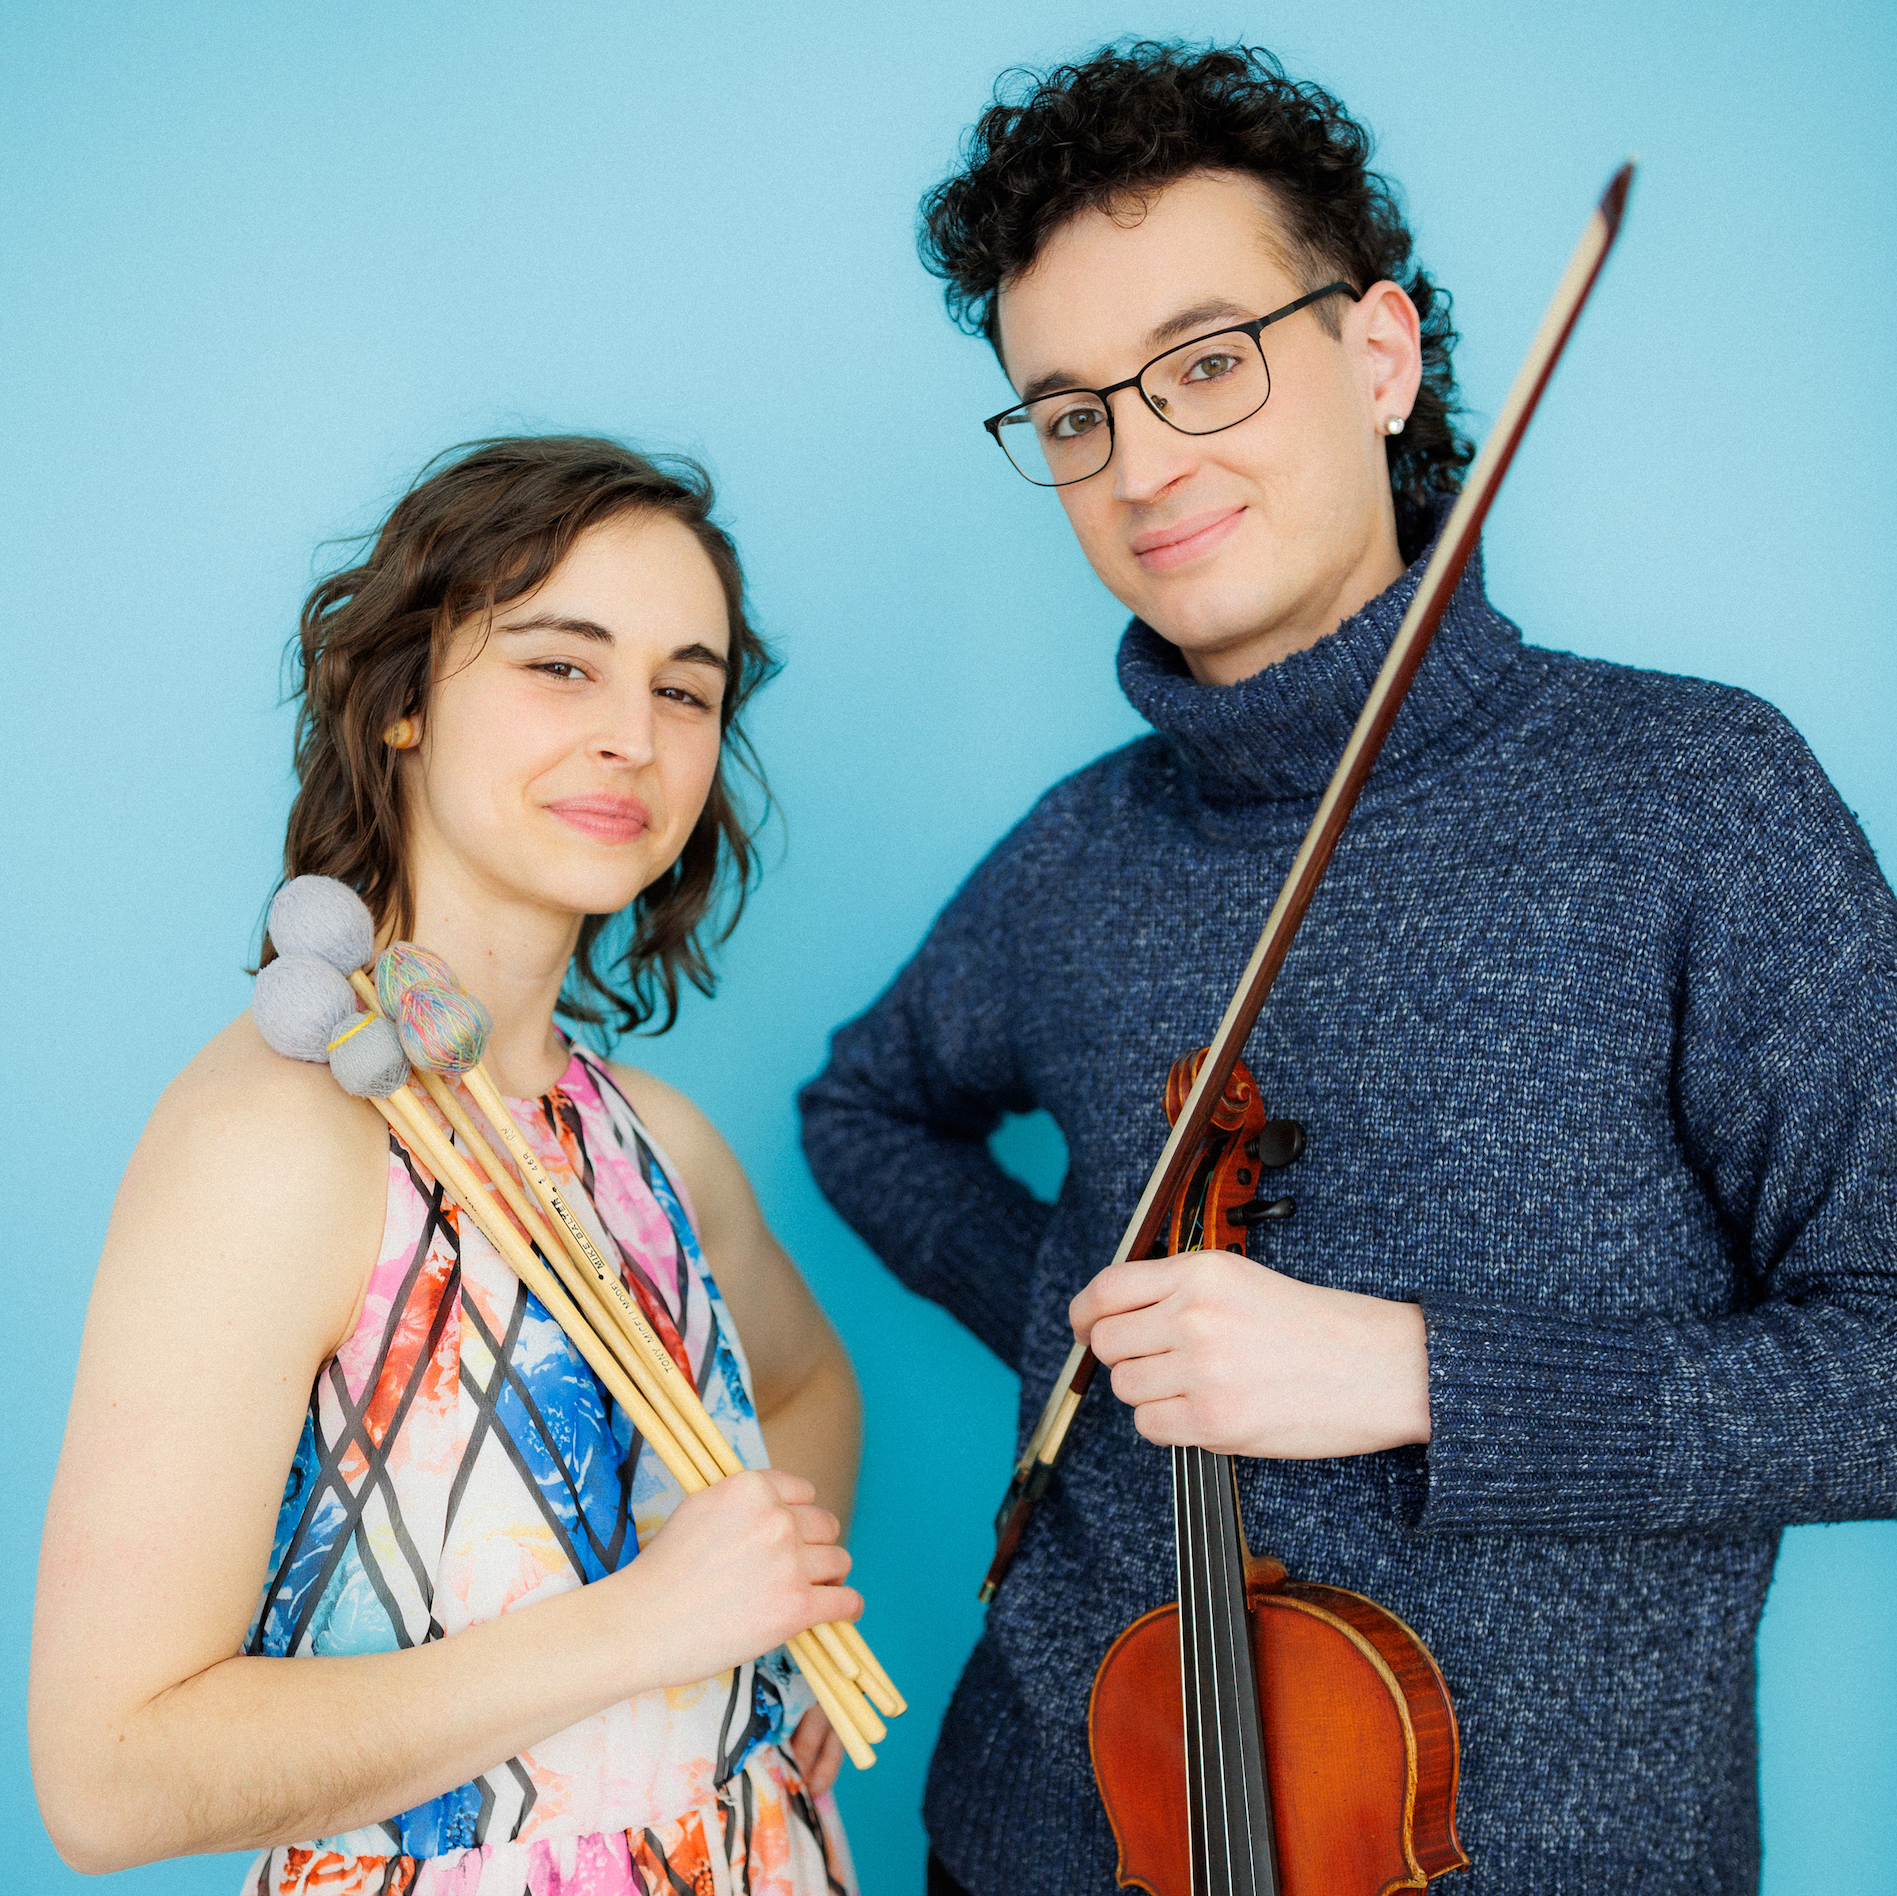  A woman with wavy brown hair and a man with curly dark hair stare at the camera and smile lightly. They are holding mallets and a violin in front of a blue background. 